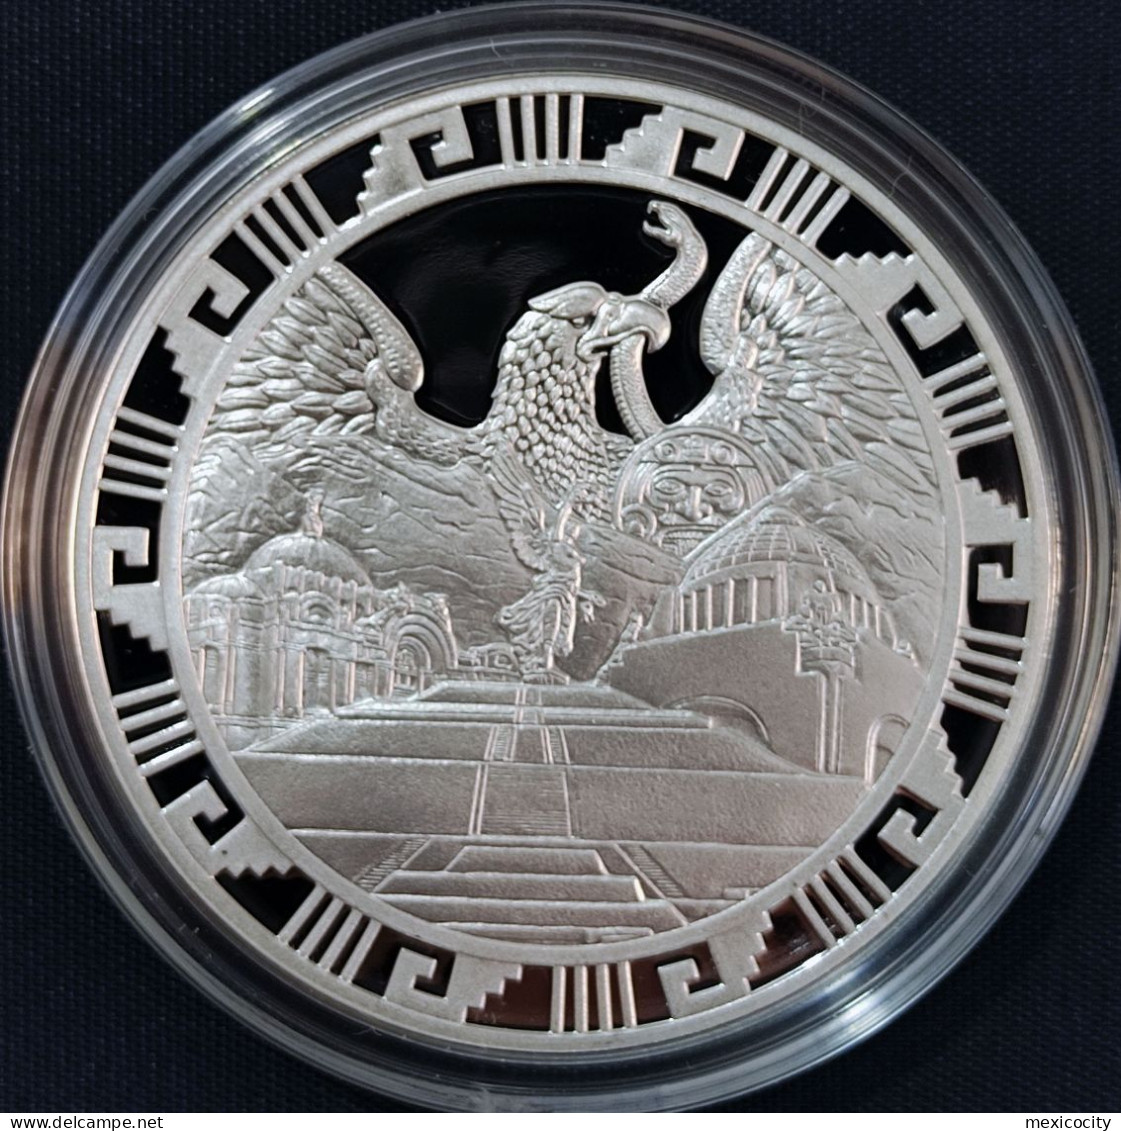 MEXICO Mint MEXICAN LANDSCAPE & WINGED VICTORY Deep Cameo Luxury .999 Silver Oz. PROOF Encapsulated - Mexiko